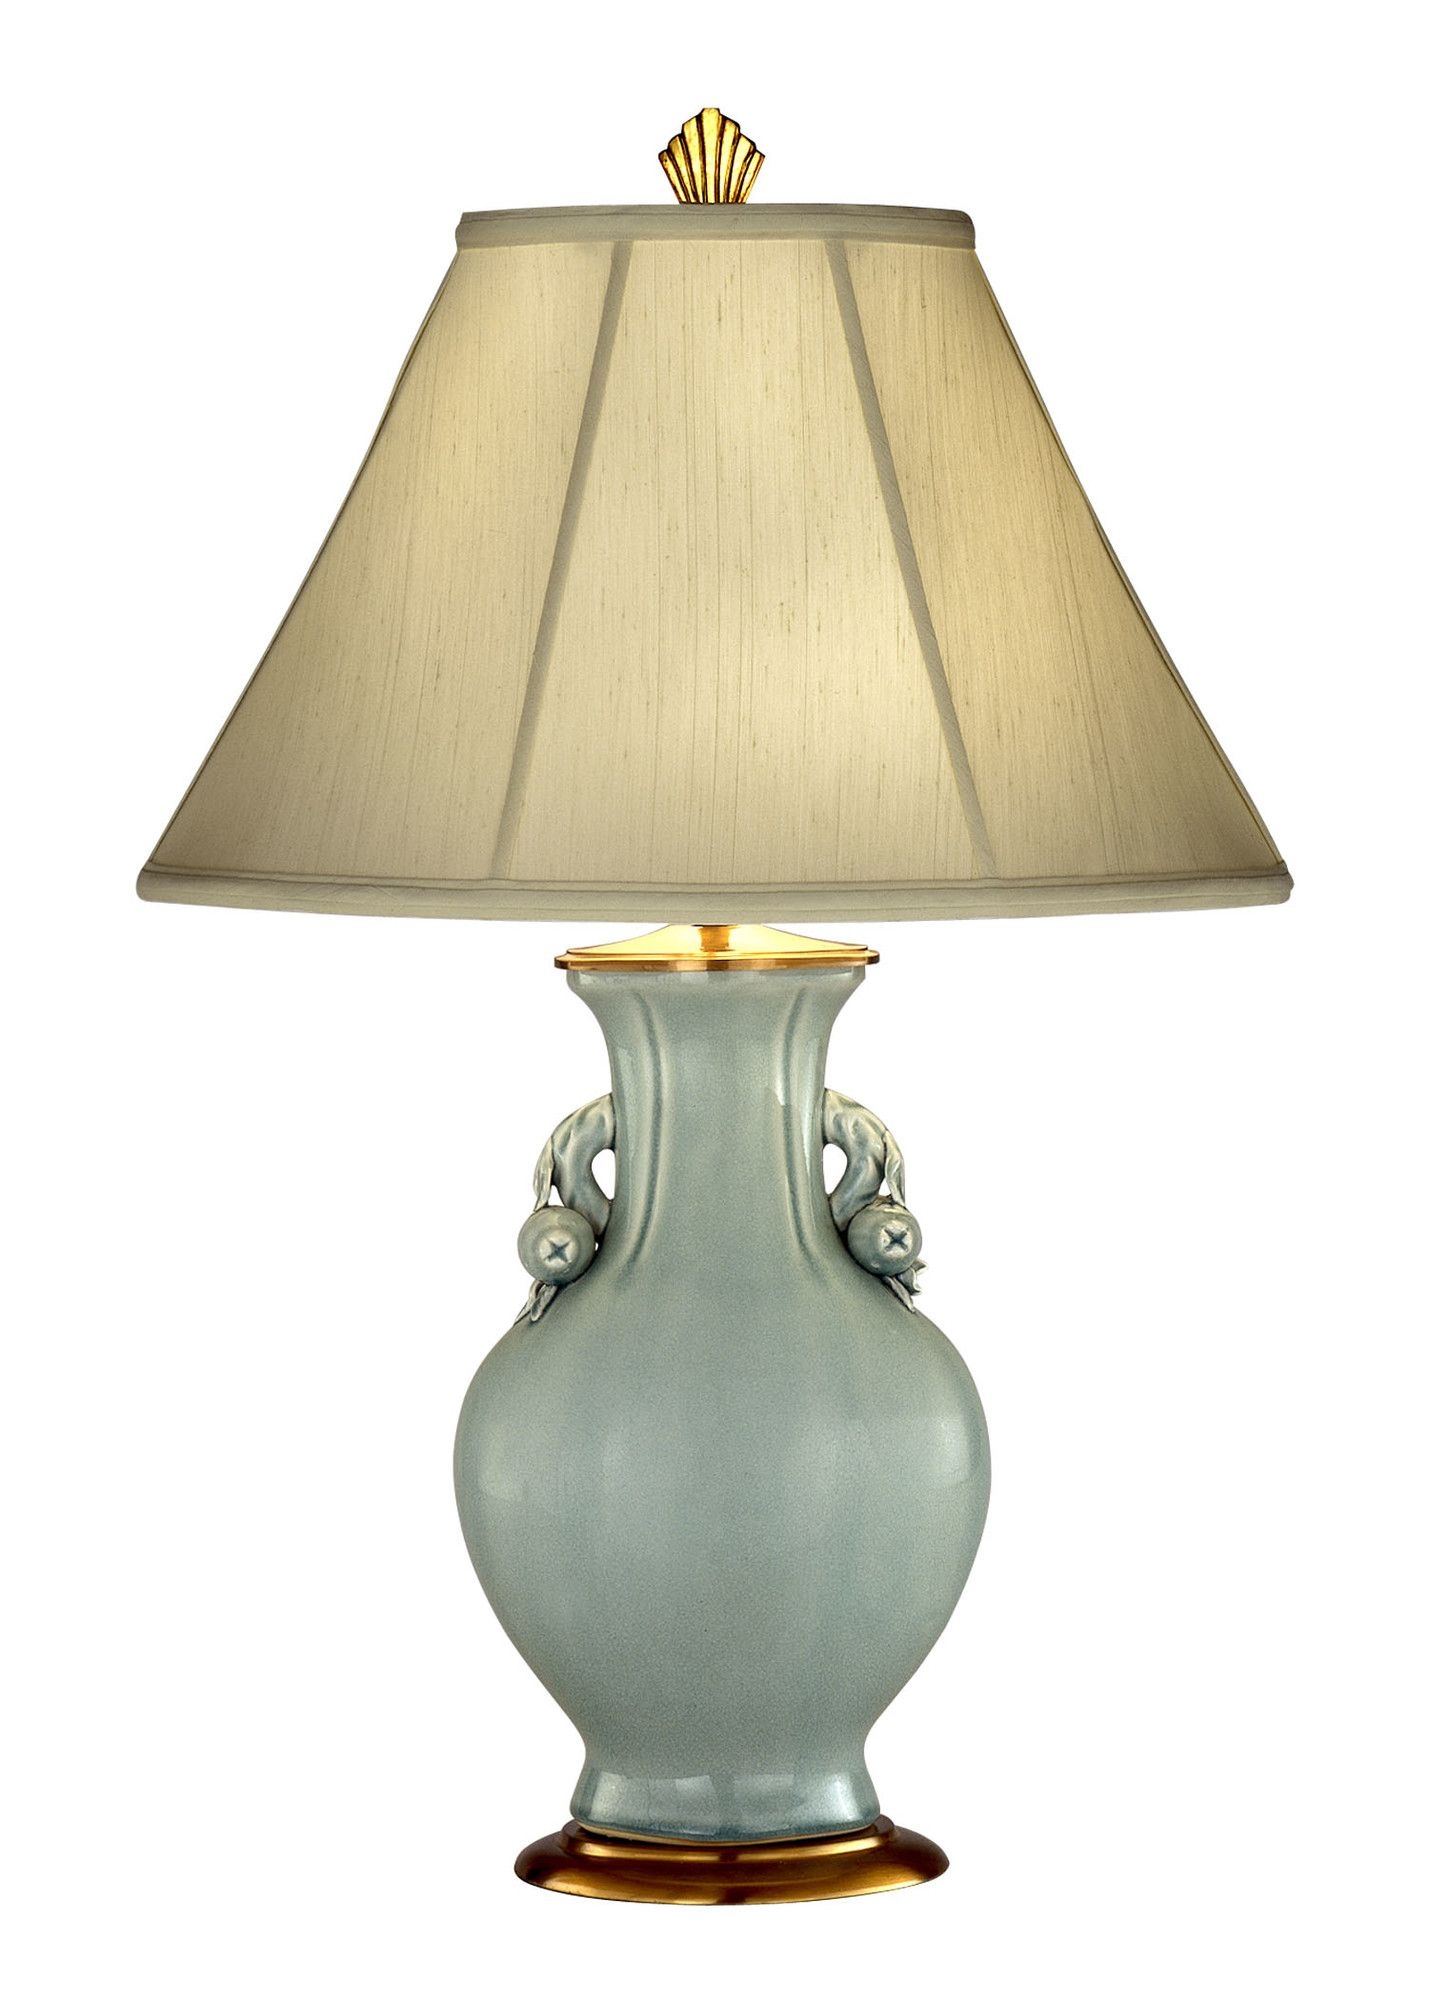 29" H Table Lamp with Empire Shade